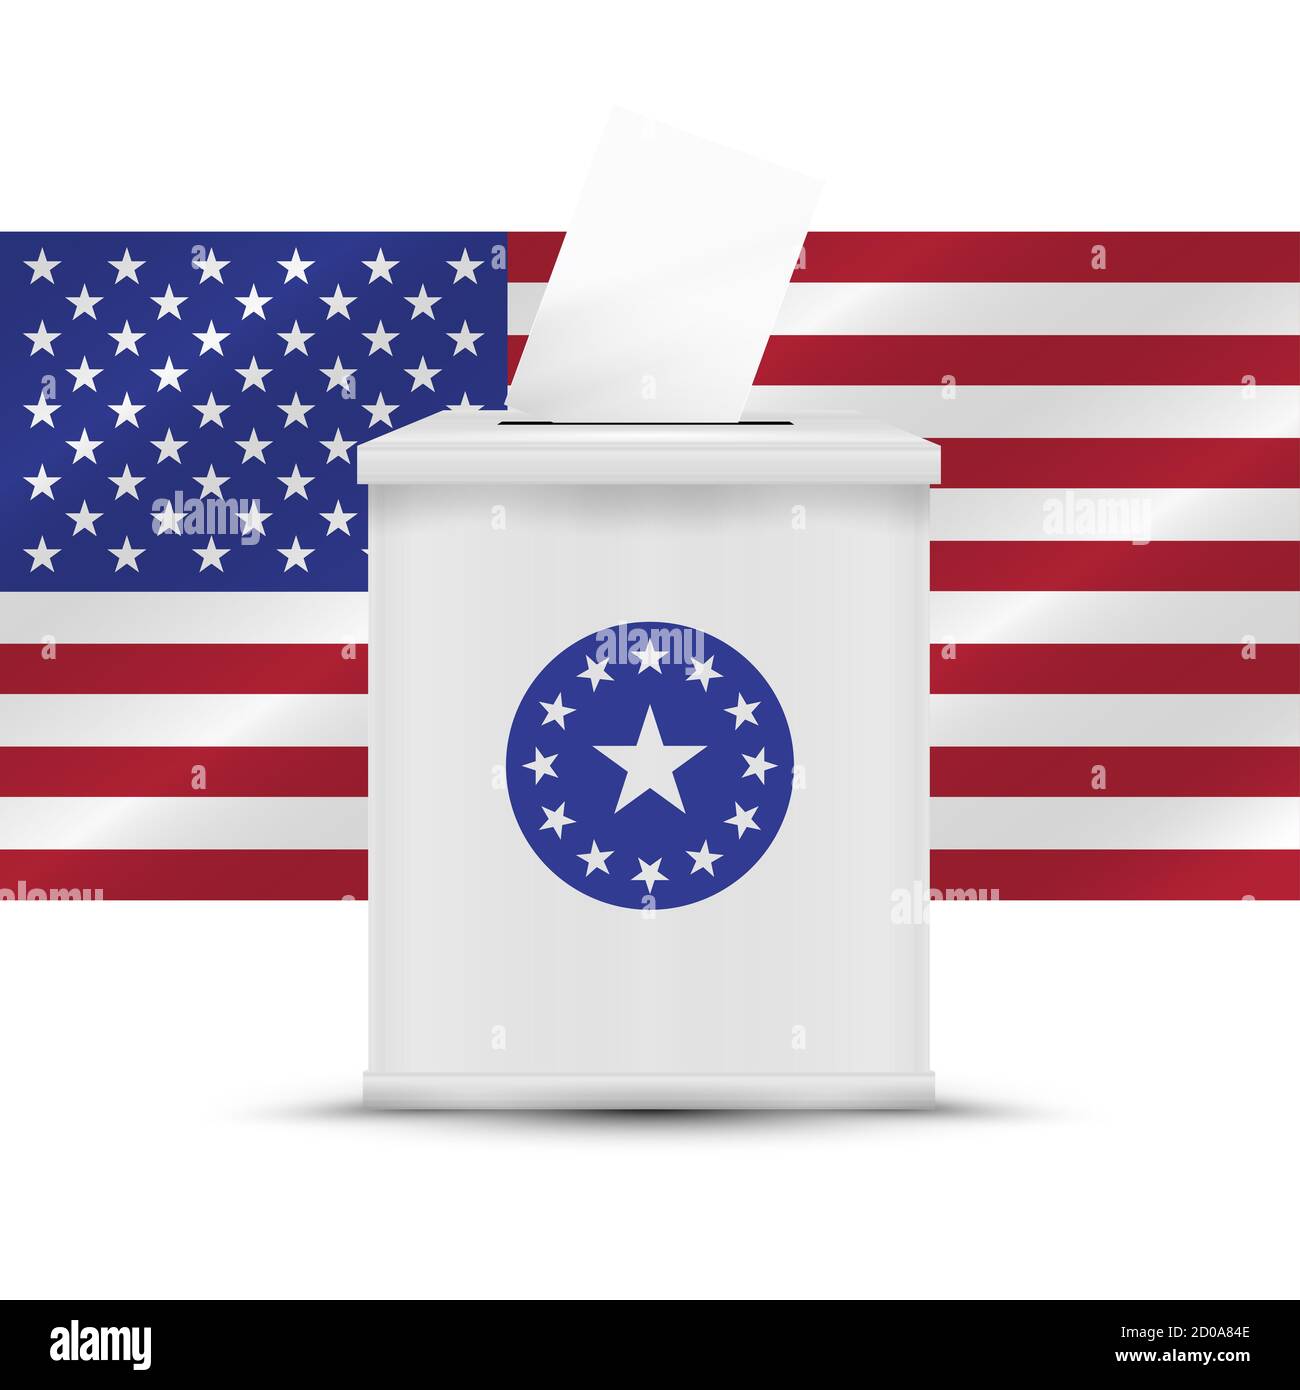 White ballot box with american flag background. 2020 United States presidential election. illustration. Stock Photo